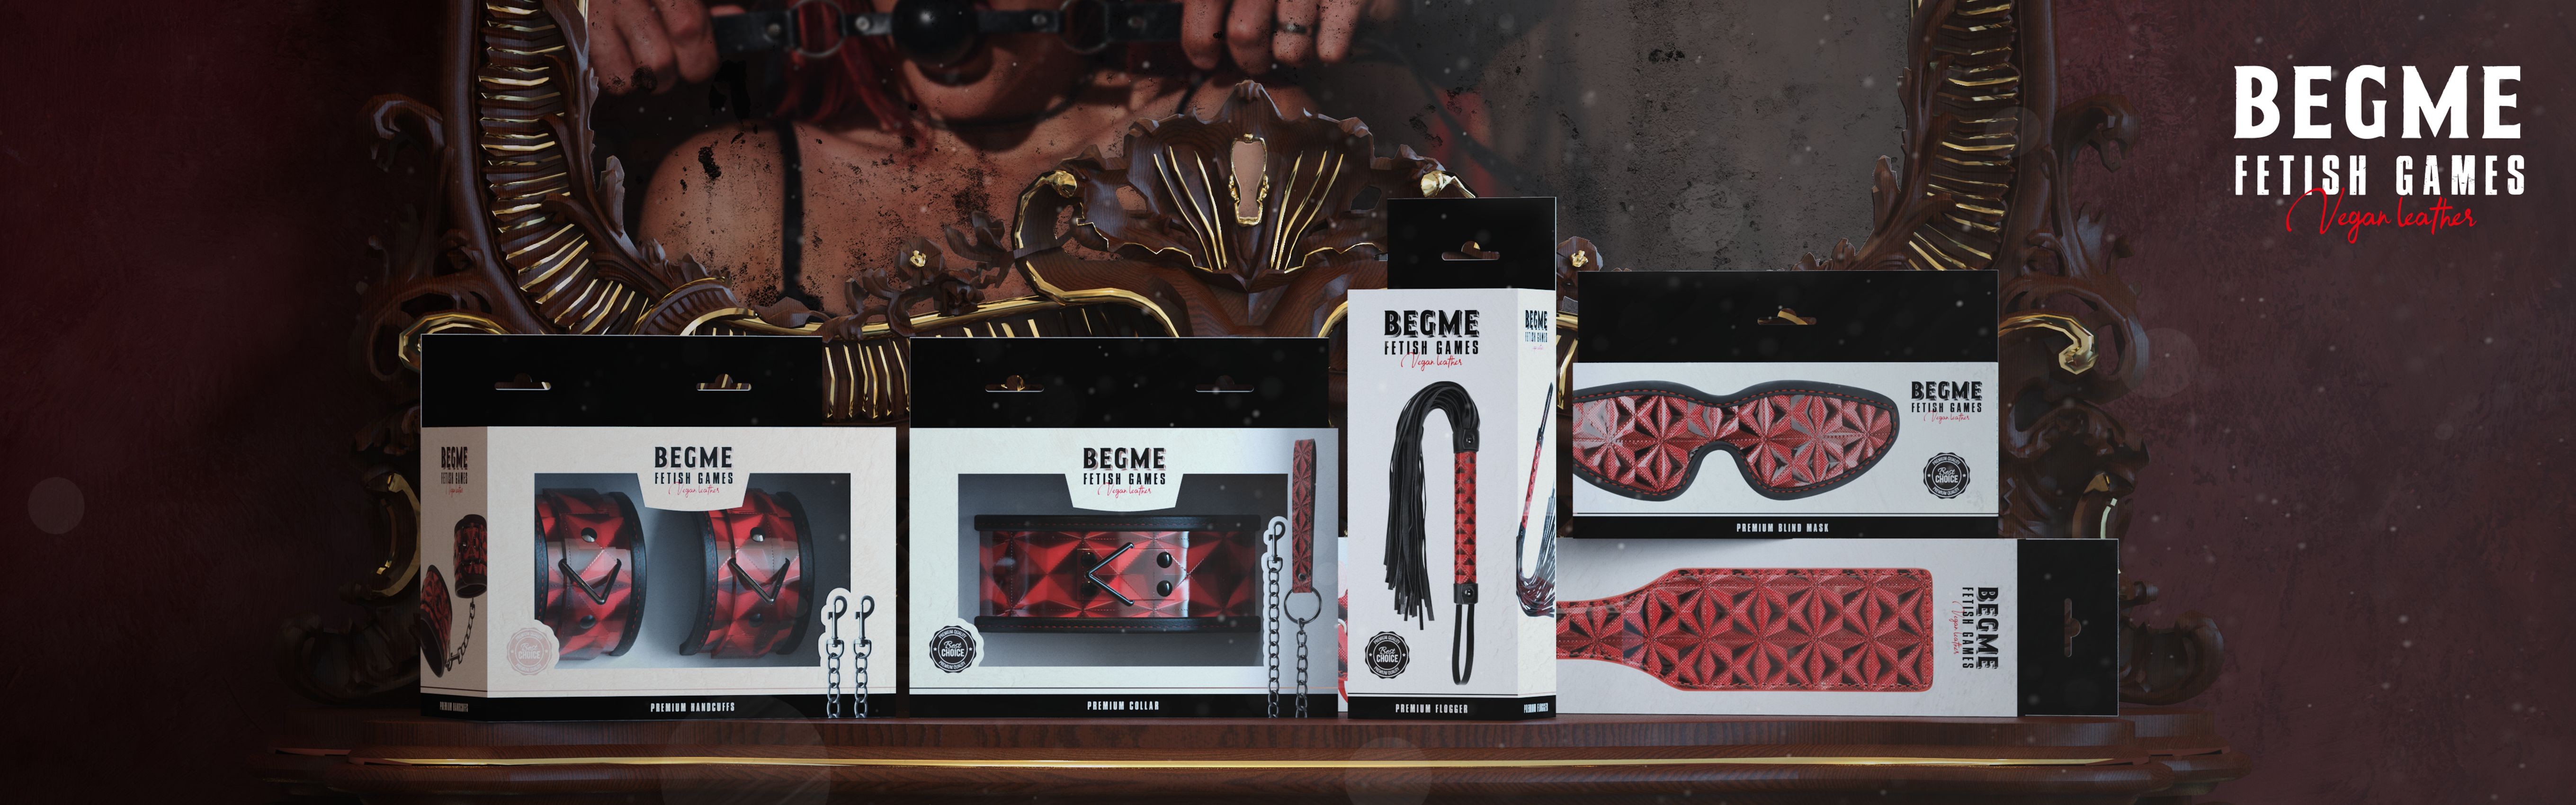 Begme Red Edition